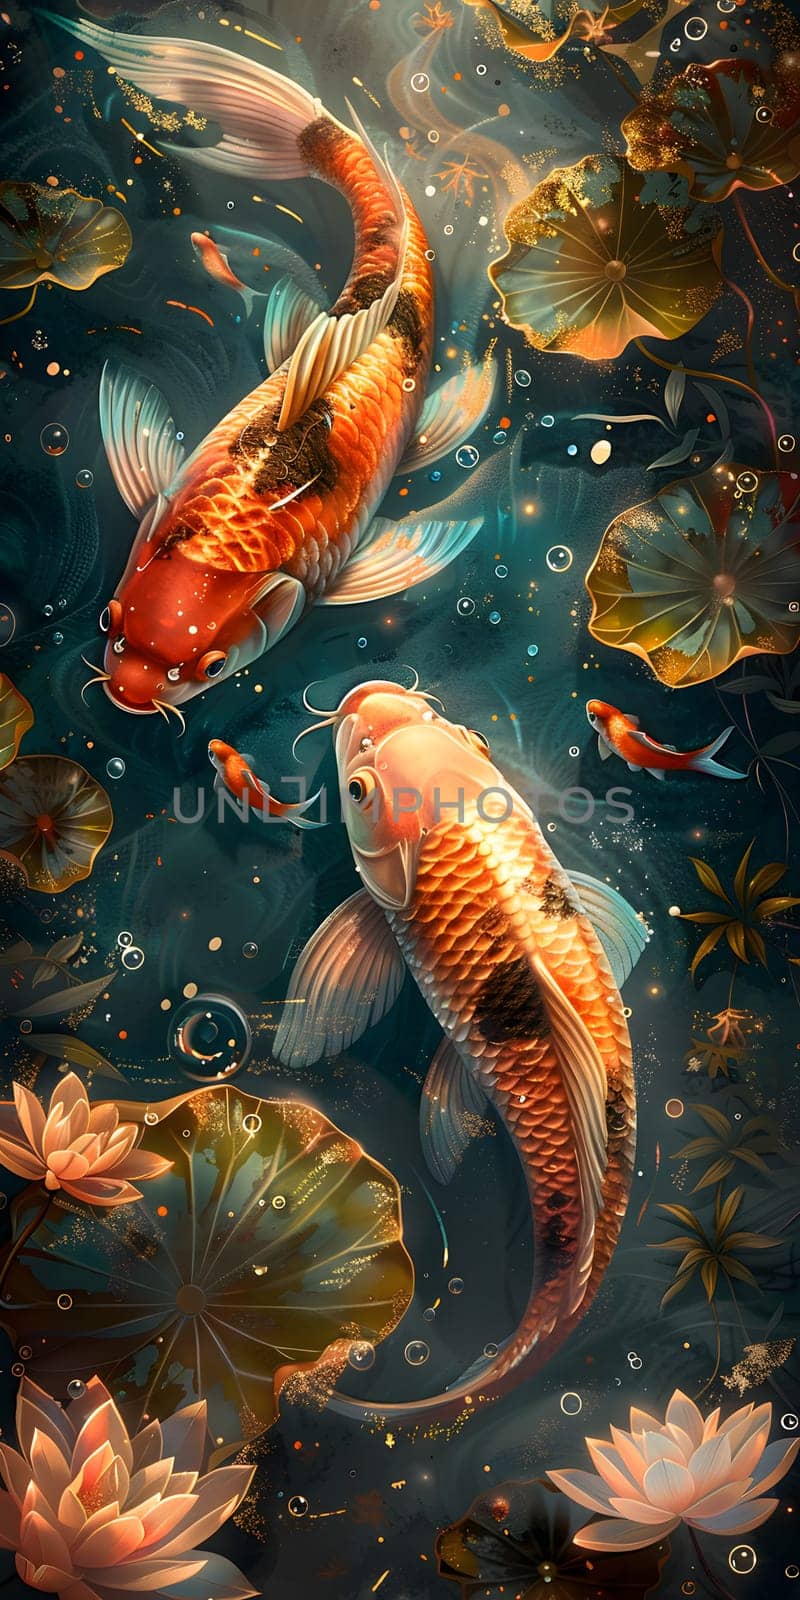 A beautiful painting depicting three electric blue koi fish gracefully swimming in a pond filled with water lilies, showcasing the beauty of marine biology